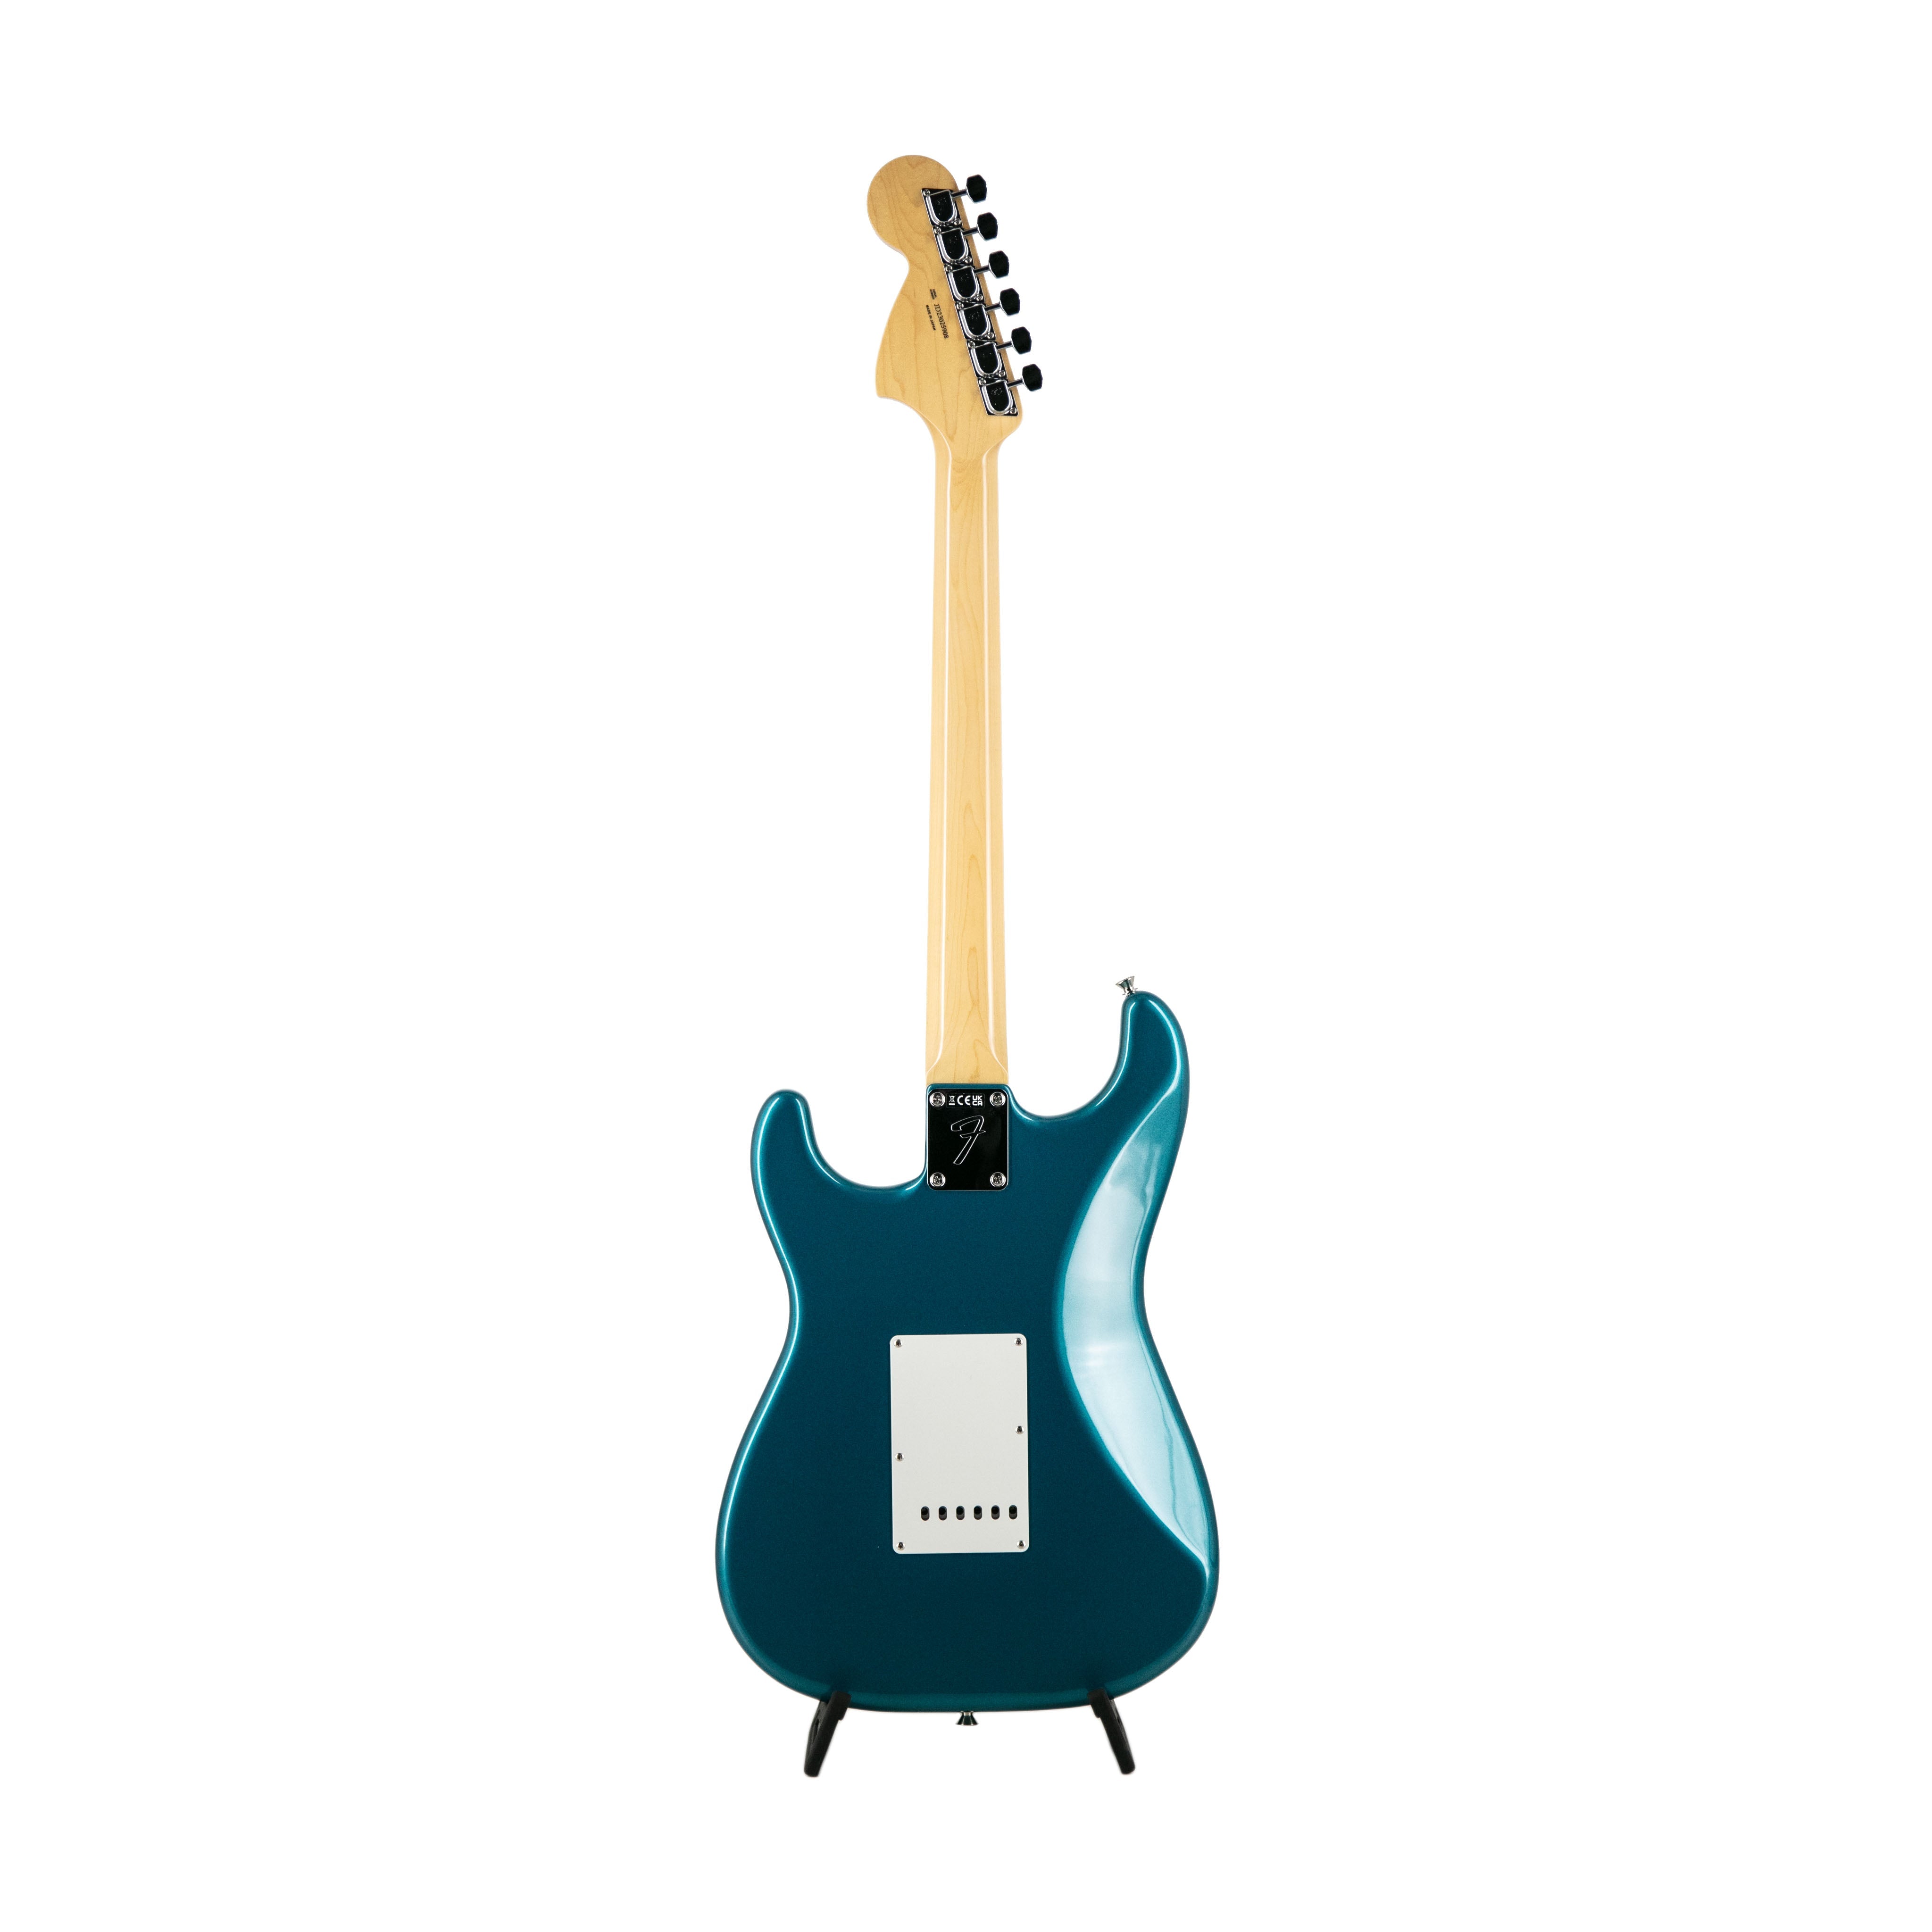 Fender FSR Collection Traditional Late 60s Stratocaster Guitar, RW FB, Ocean Turquoise Metallic